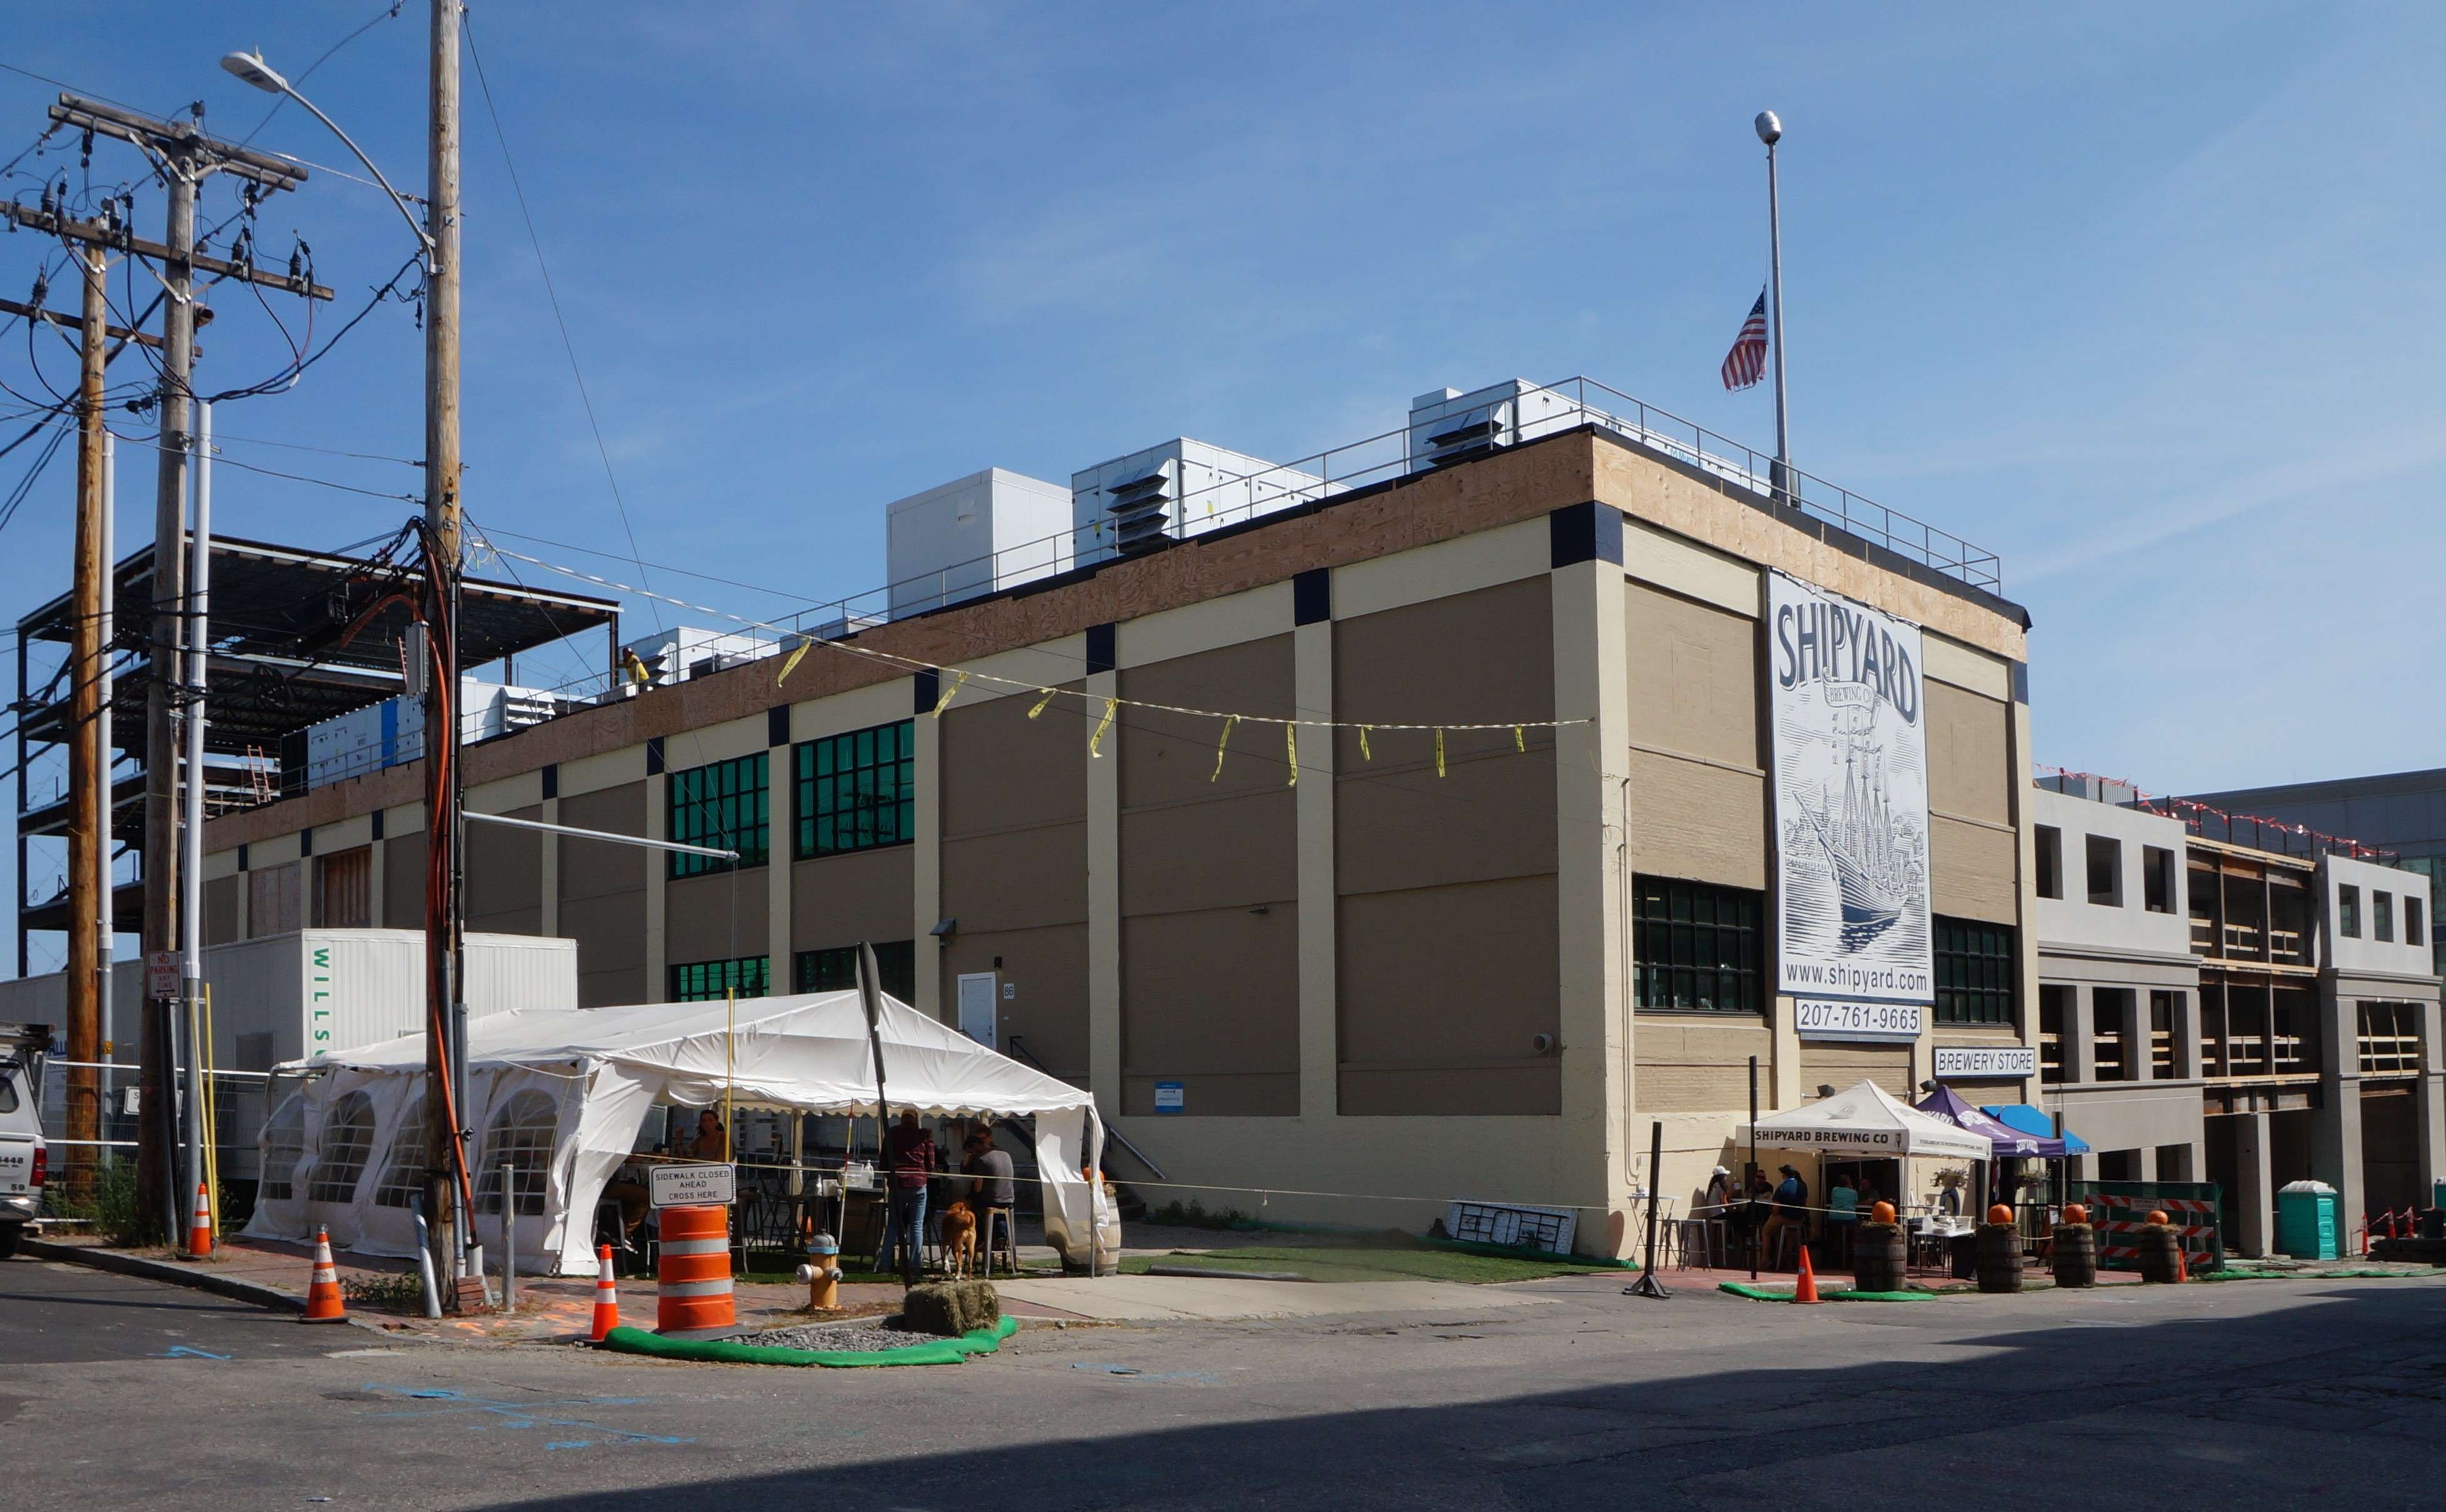 A tan three story cement building with a sign that says Shipyard Brewing Co with a modern building going up on its right and the steel structure of another new building behind it.